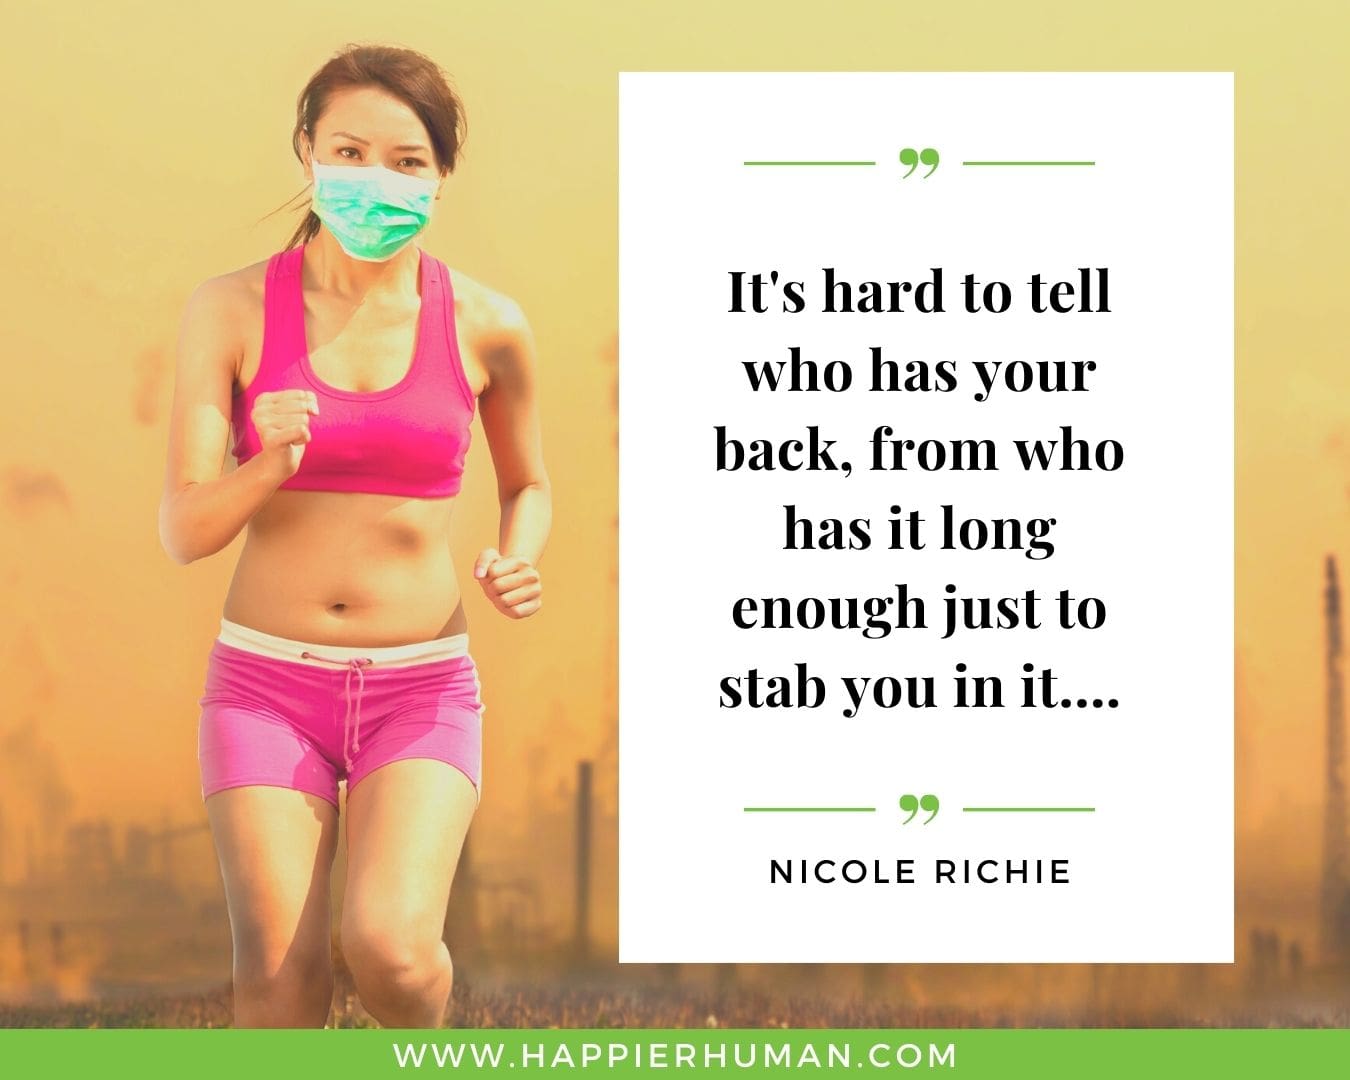 Broken Trust Quotes - “It's hard to tell who has your back, from who has it long enough just to stab you in it....” - Nicole Richie